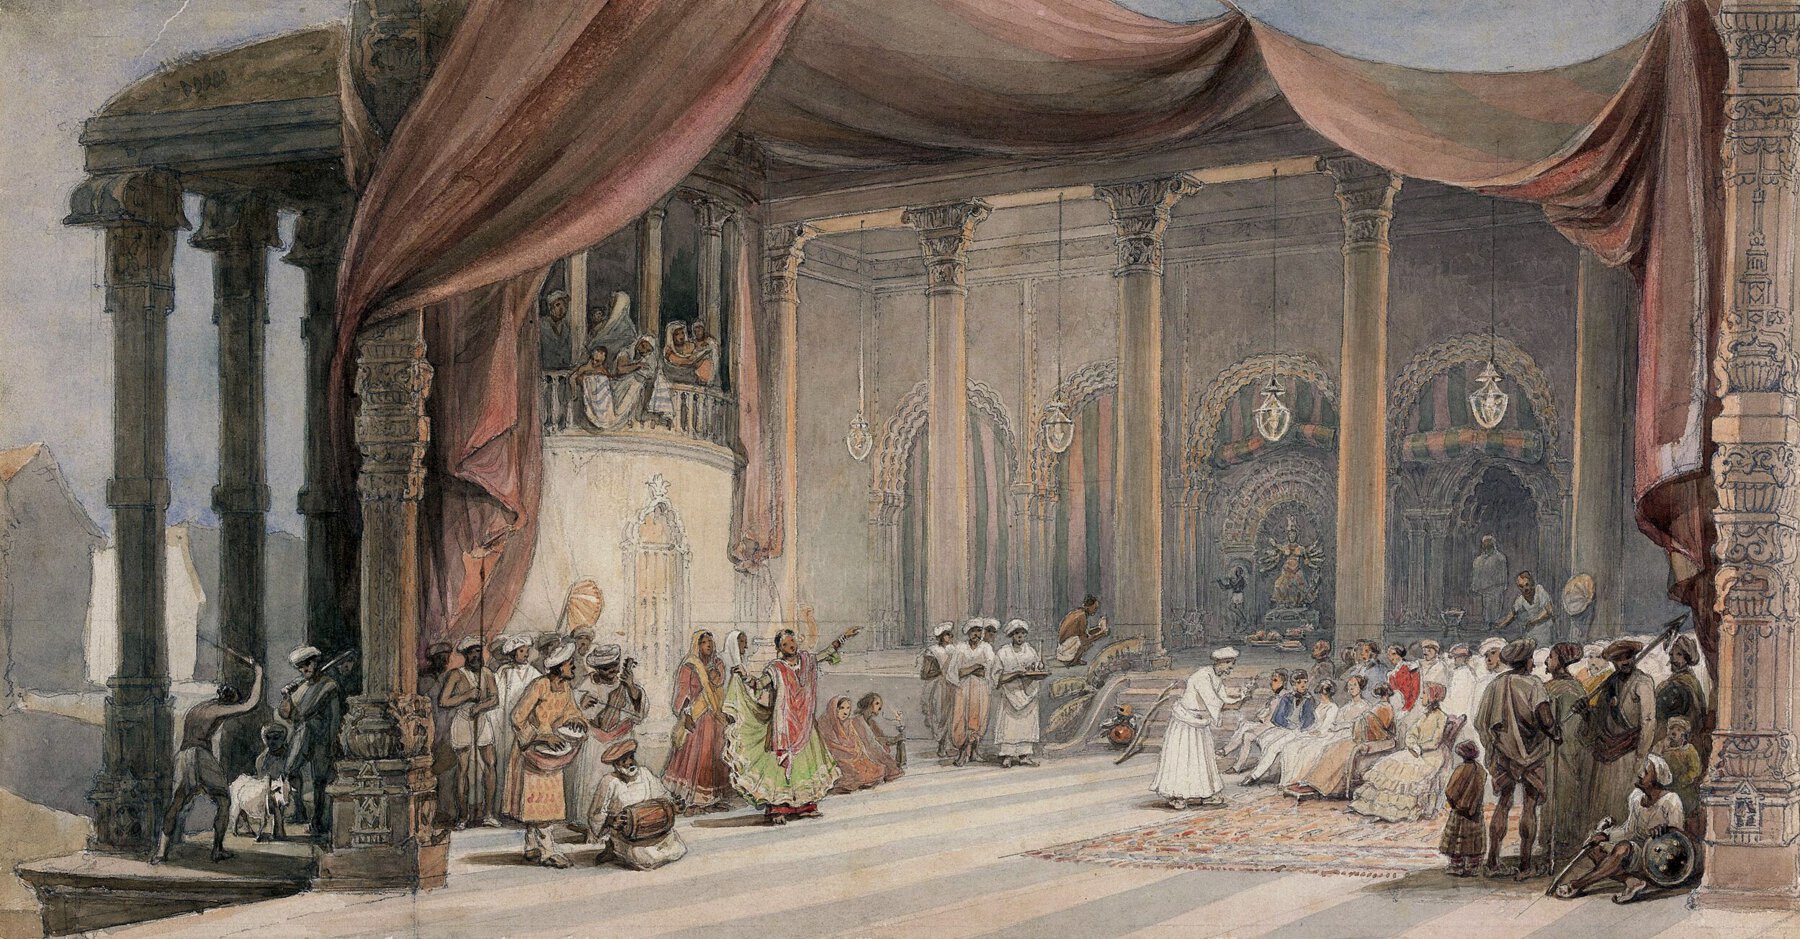 Painting of dancers in large ballroom.